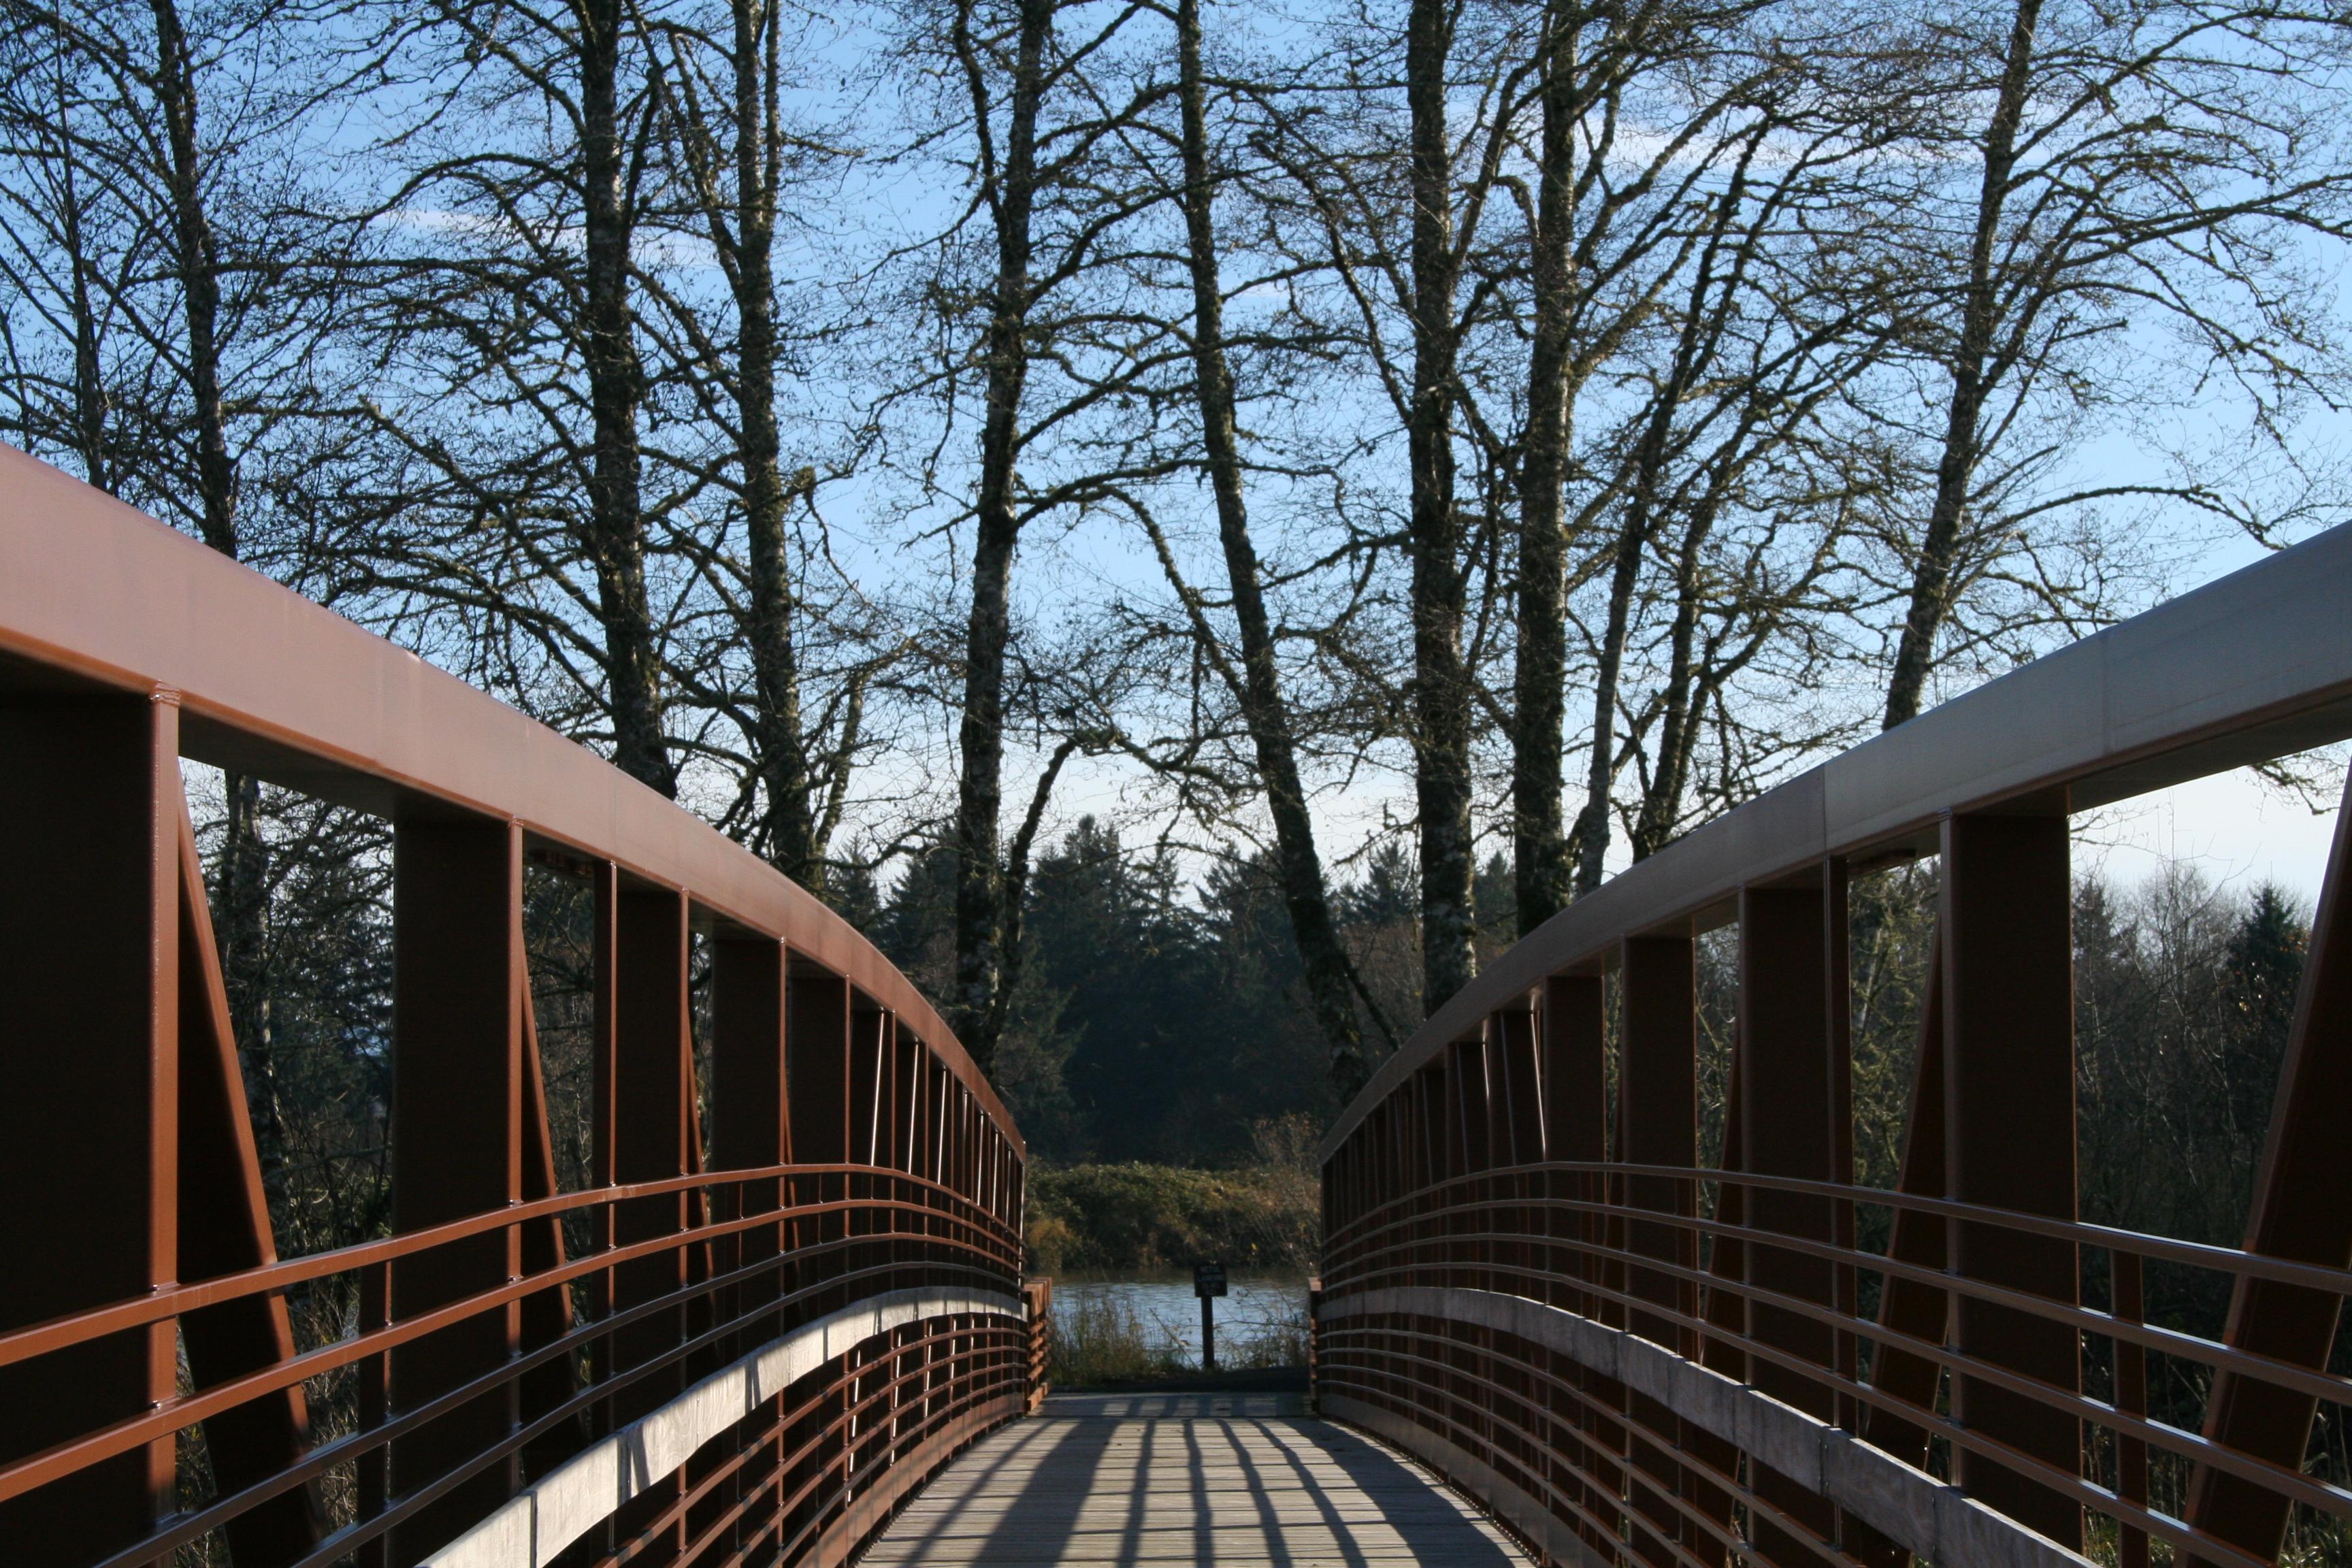 Looking directly down a short railed bridge towards a calm river surrounded by leafless trees.